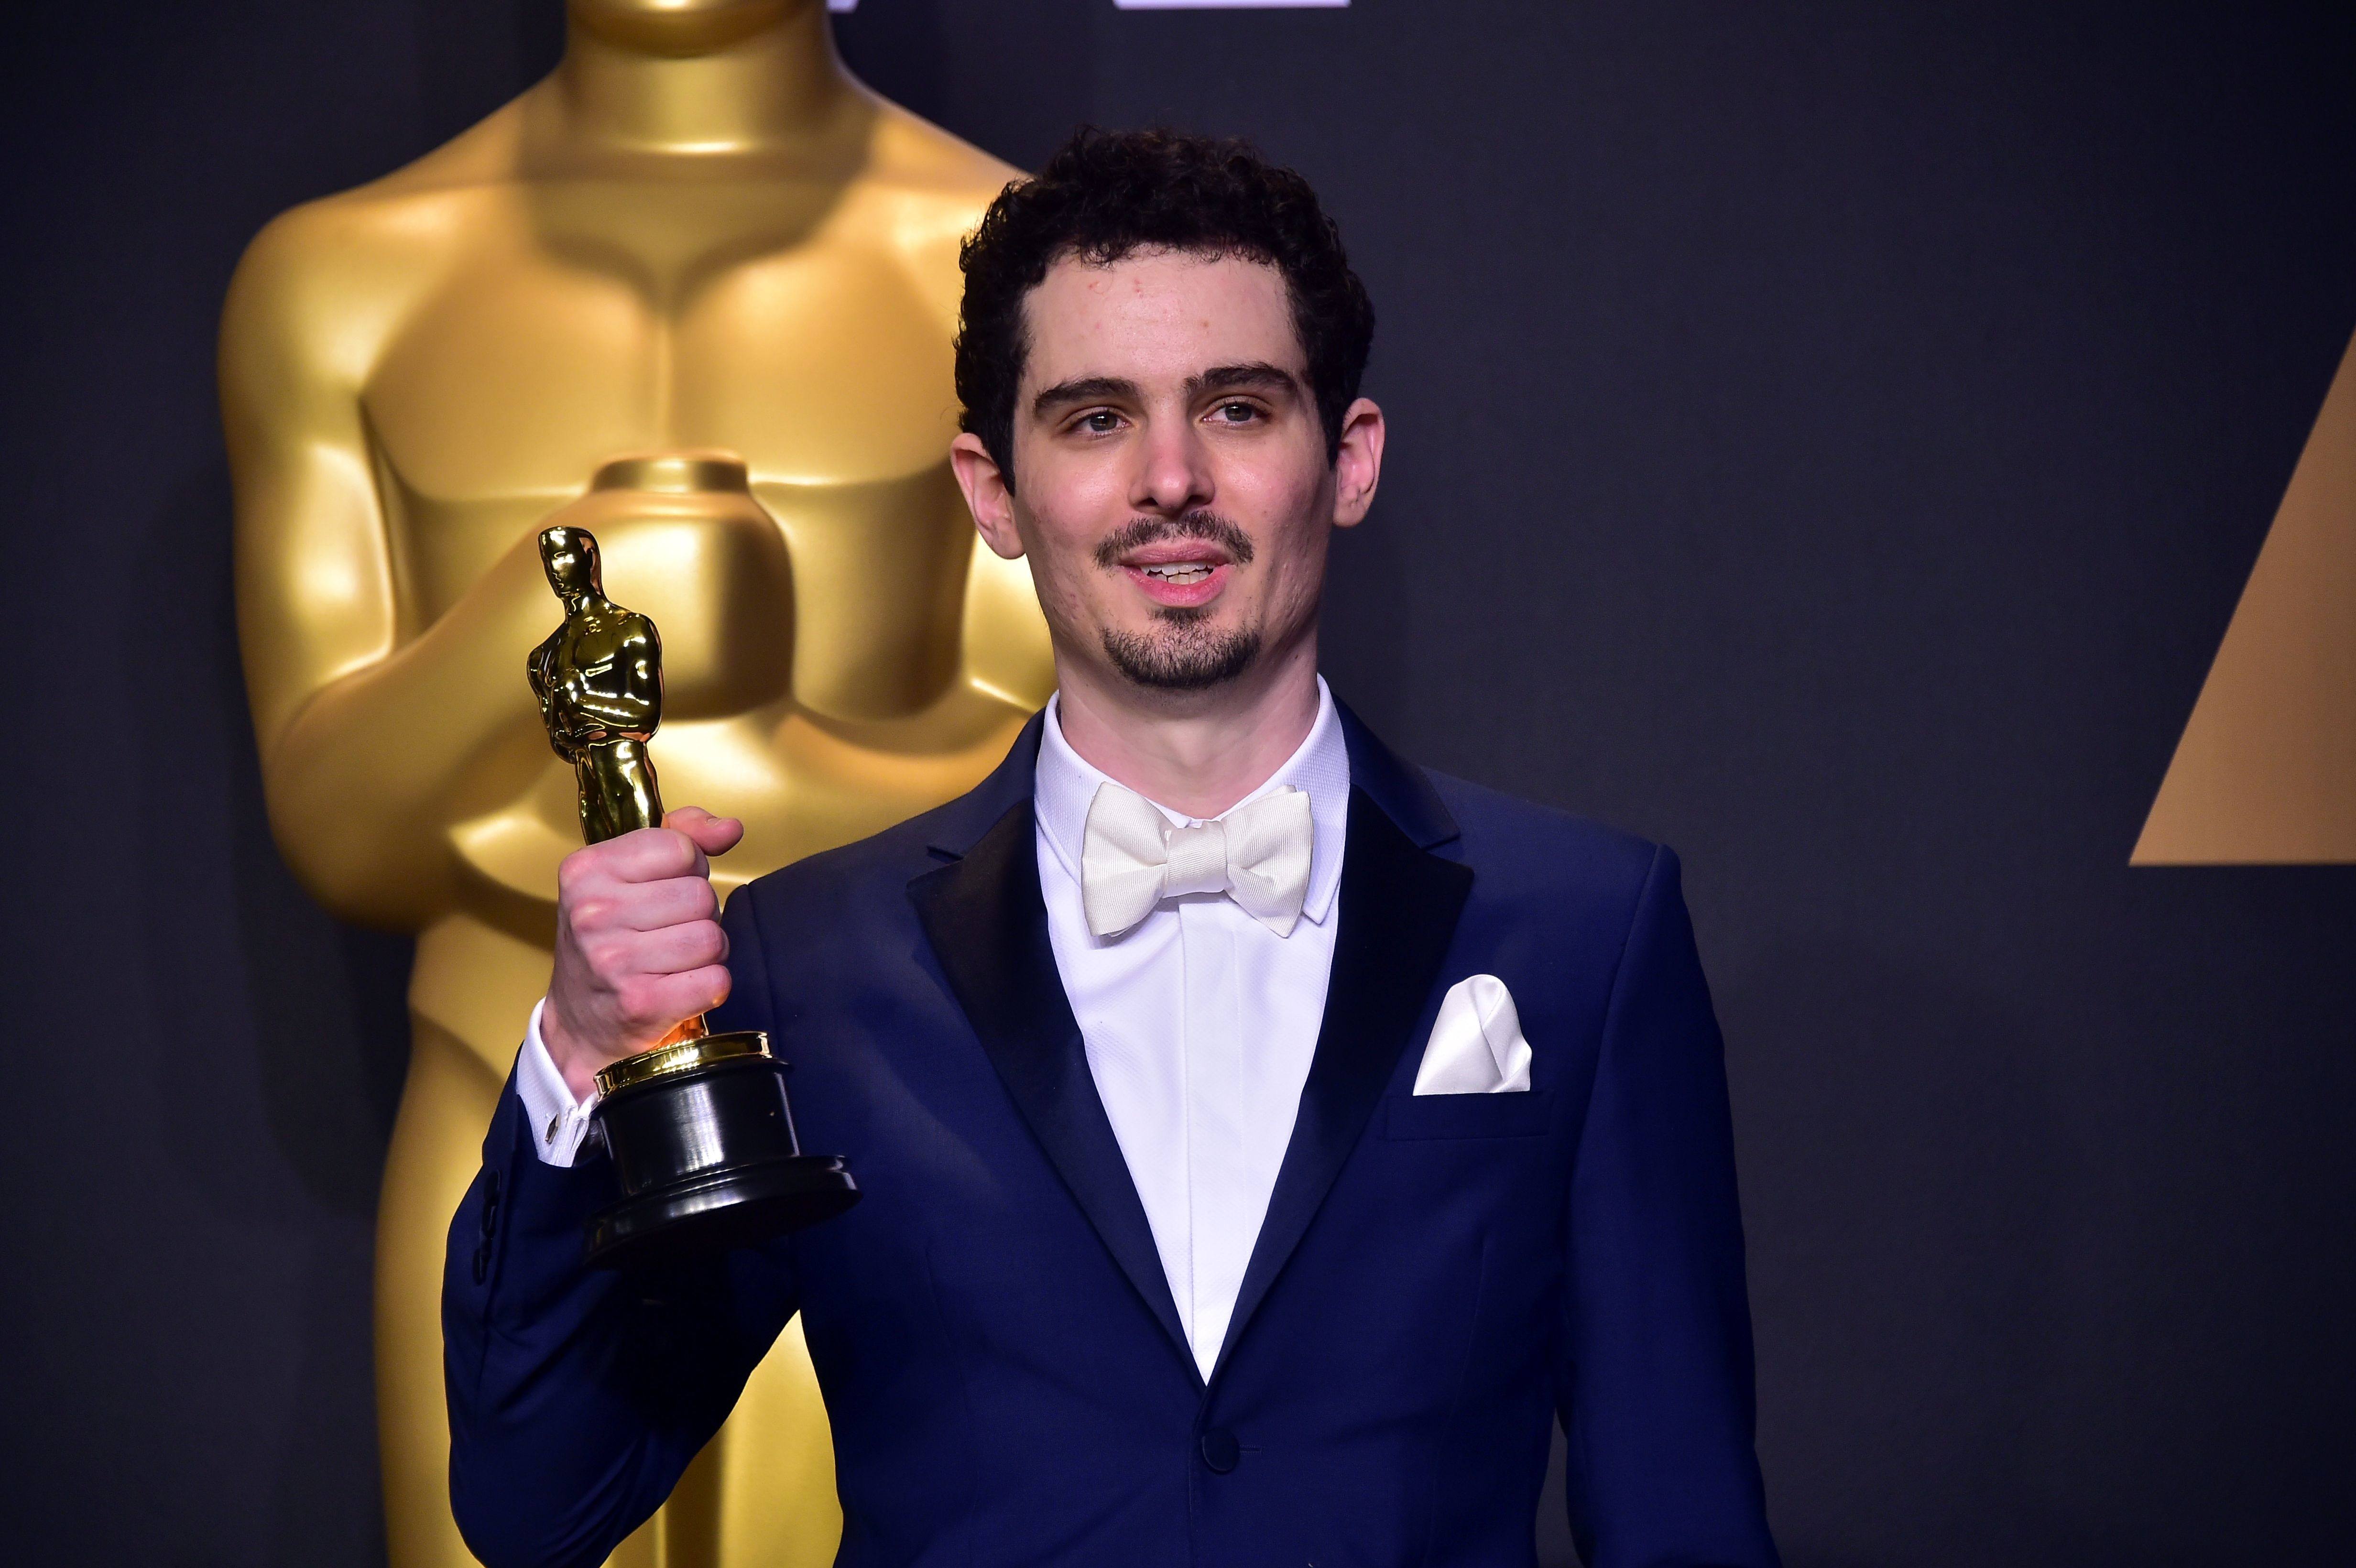 Director Damien Chazelle with his Oscar